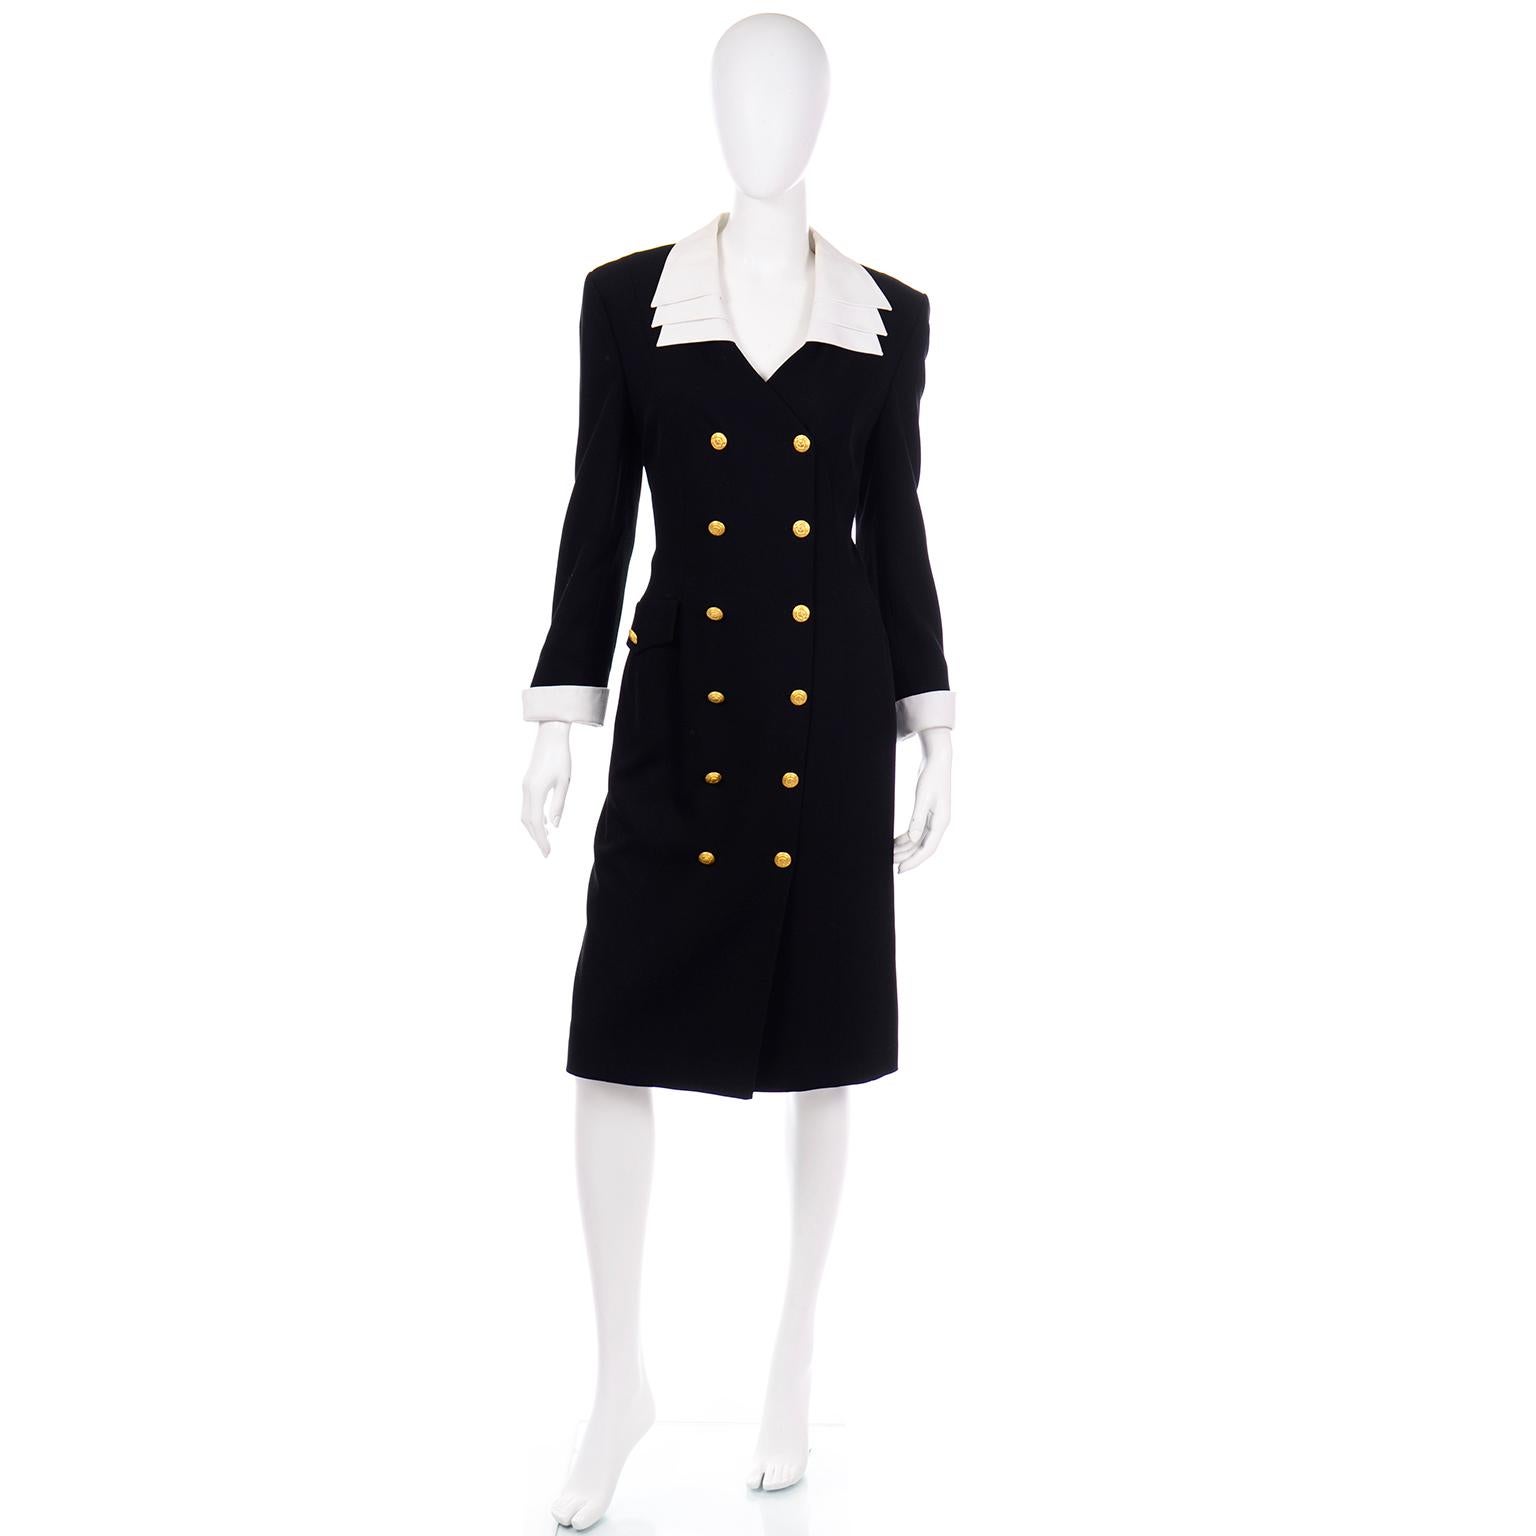 This is a fantastic double breasted black wool dress with removable cuffs and collar designed by Margaretha Ley for Escada. We love vintage Escada and are so happy that people are starting to rediscover these beautifully made pieces!This dress has a